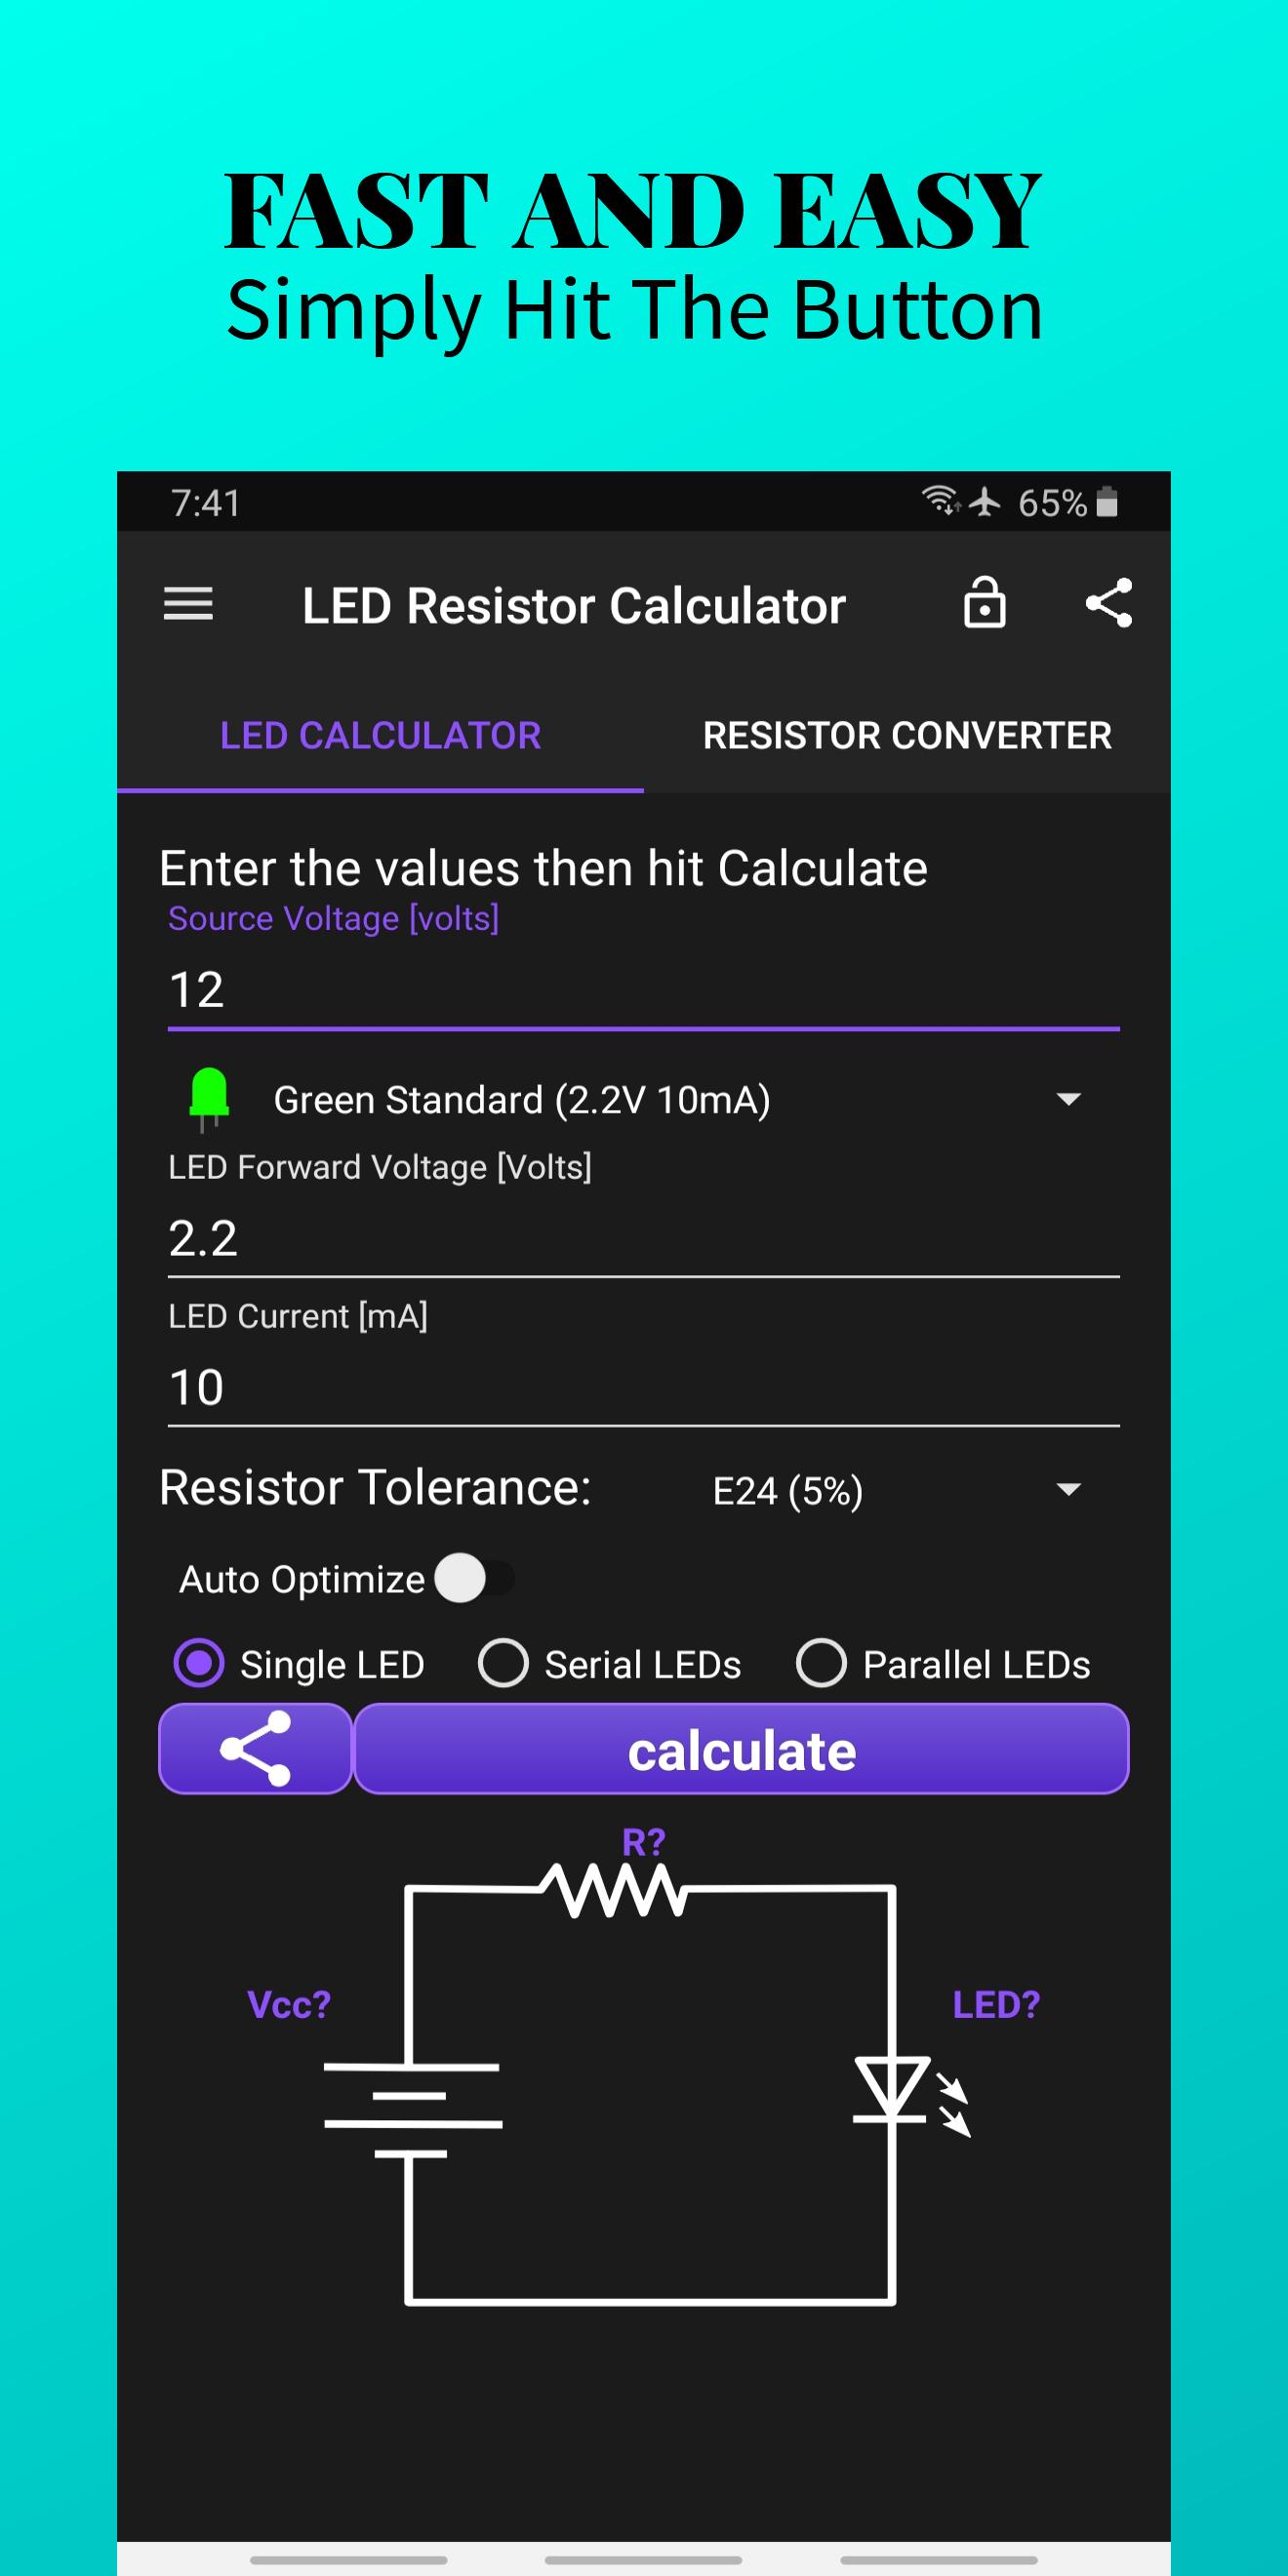 LED Resistor Calculator for Android - APK Download